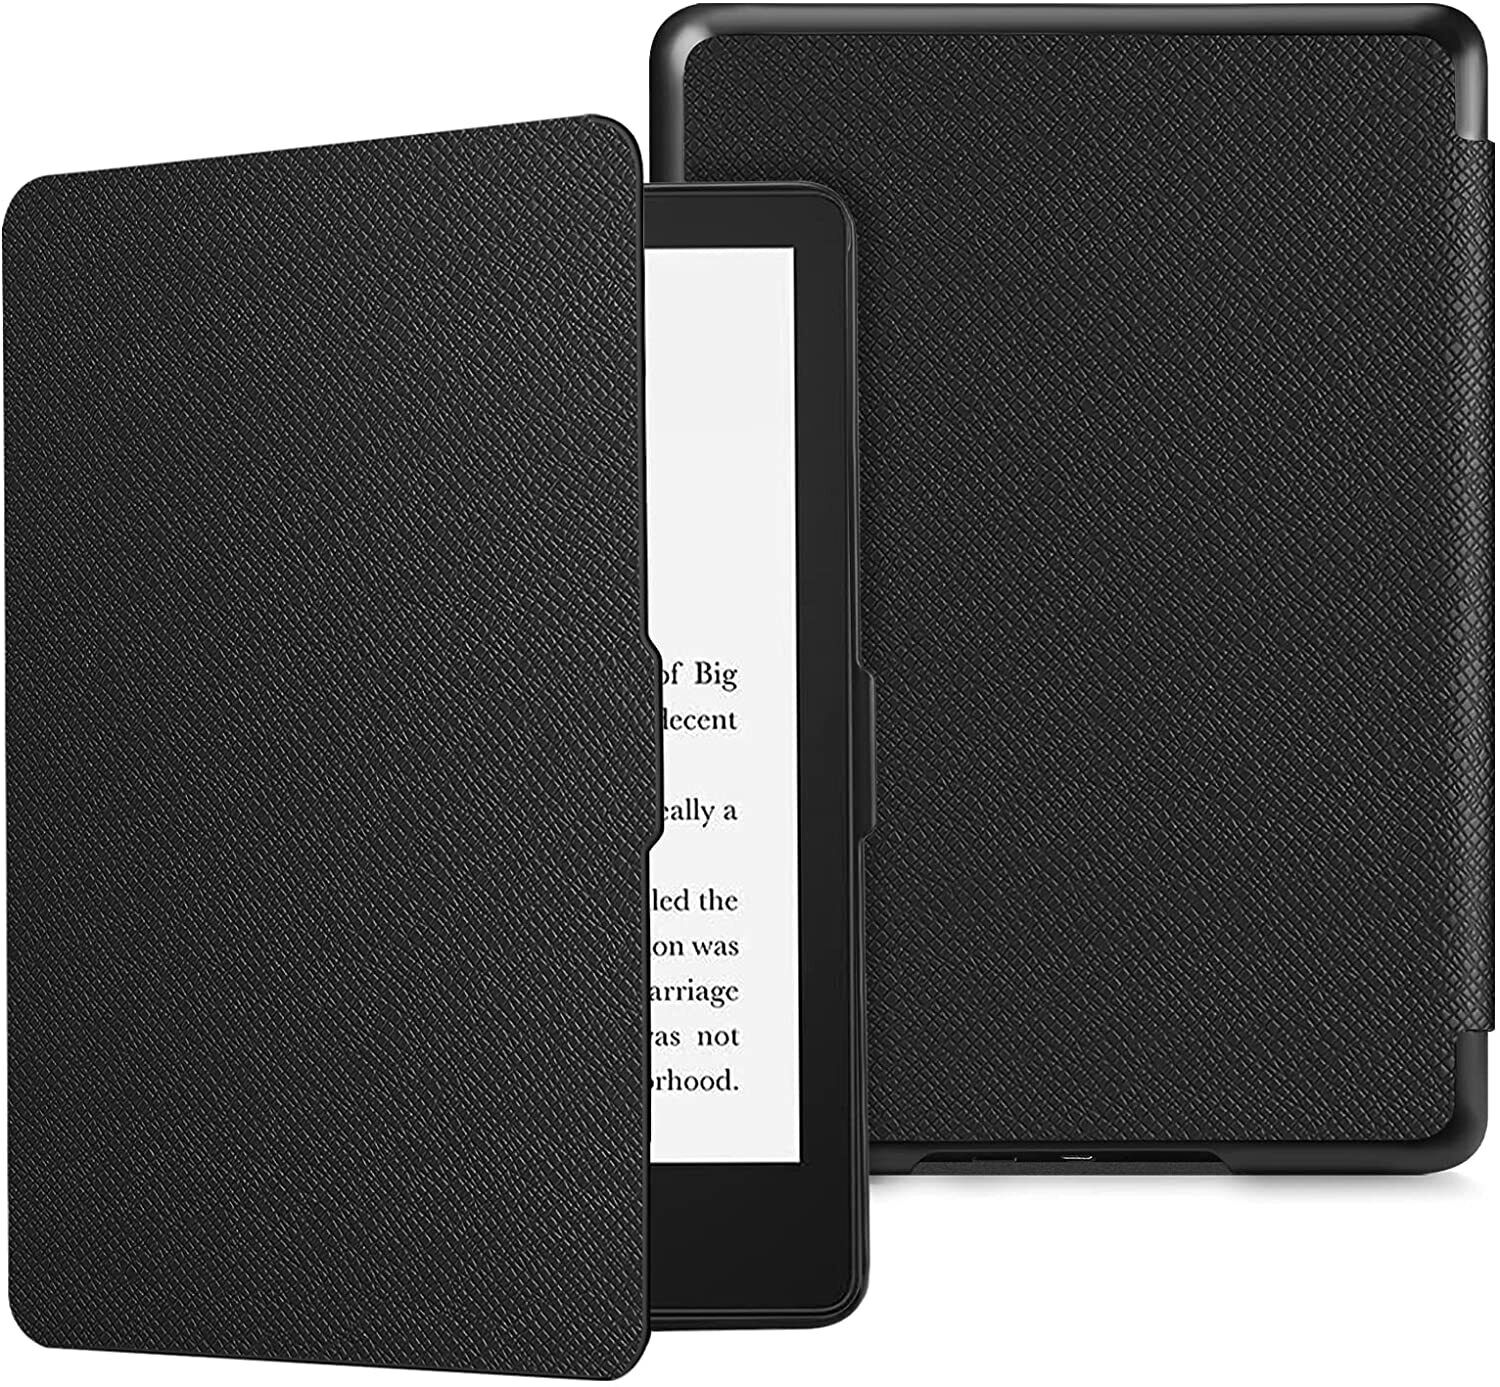 Slimshell Case For Amazon Kindle Paperwhite 2021 11th Generation Smart Cover